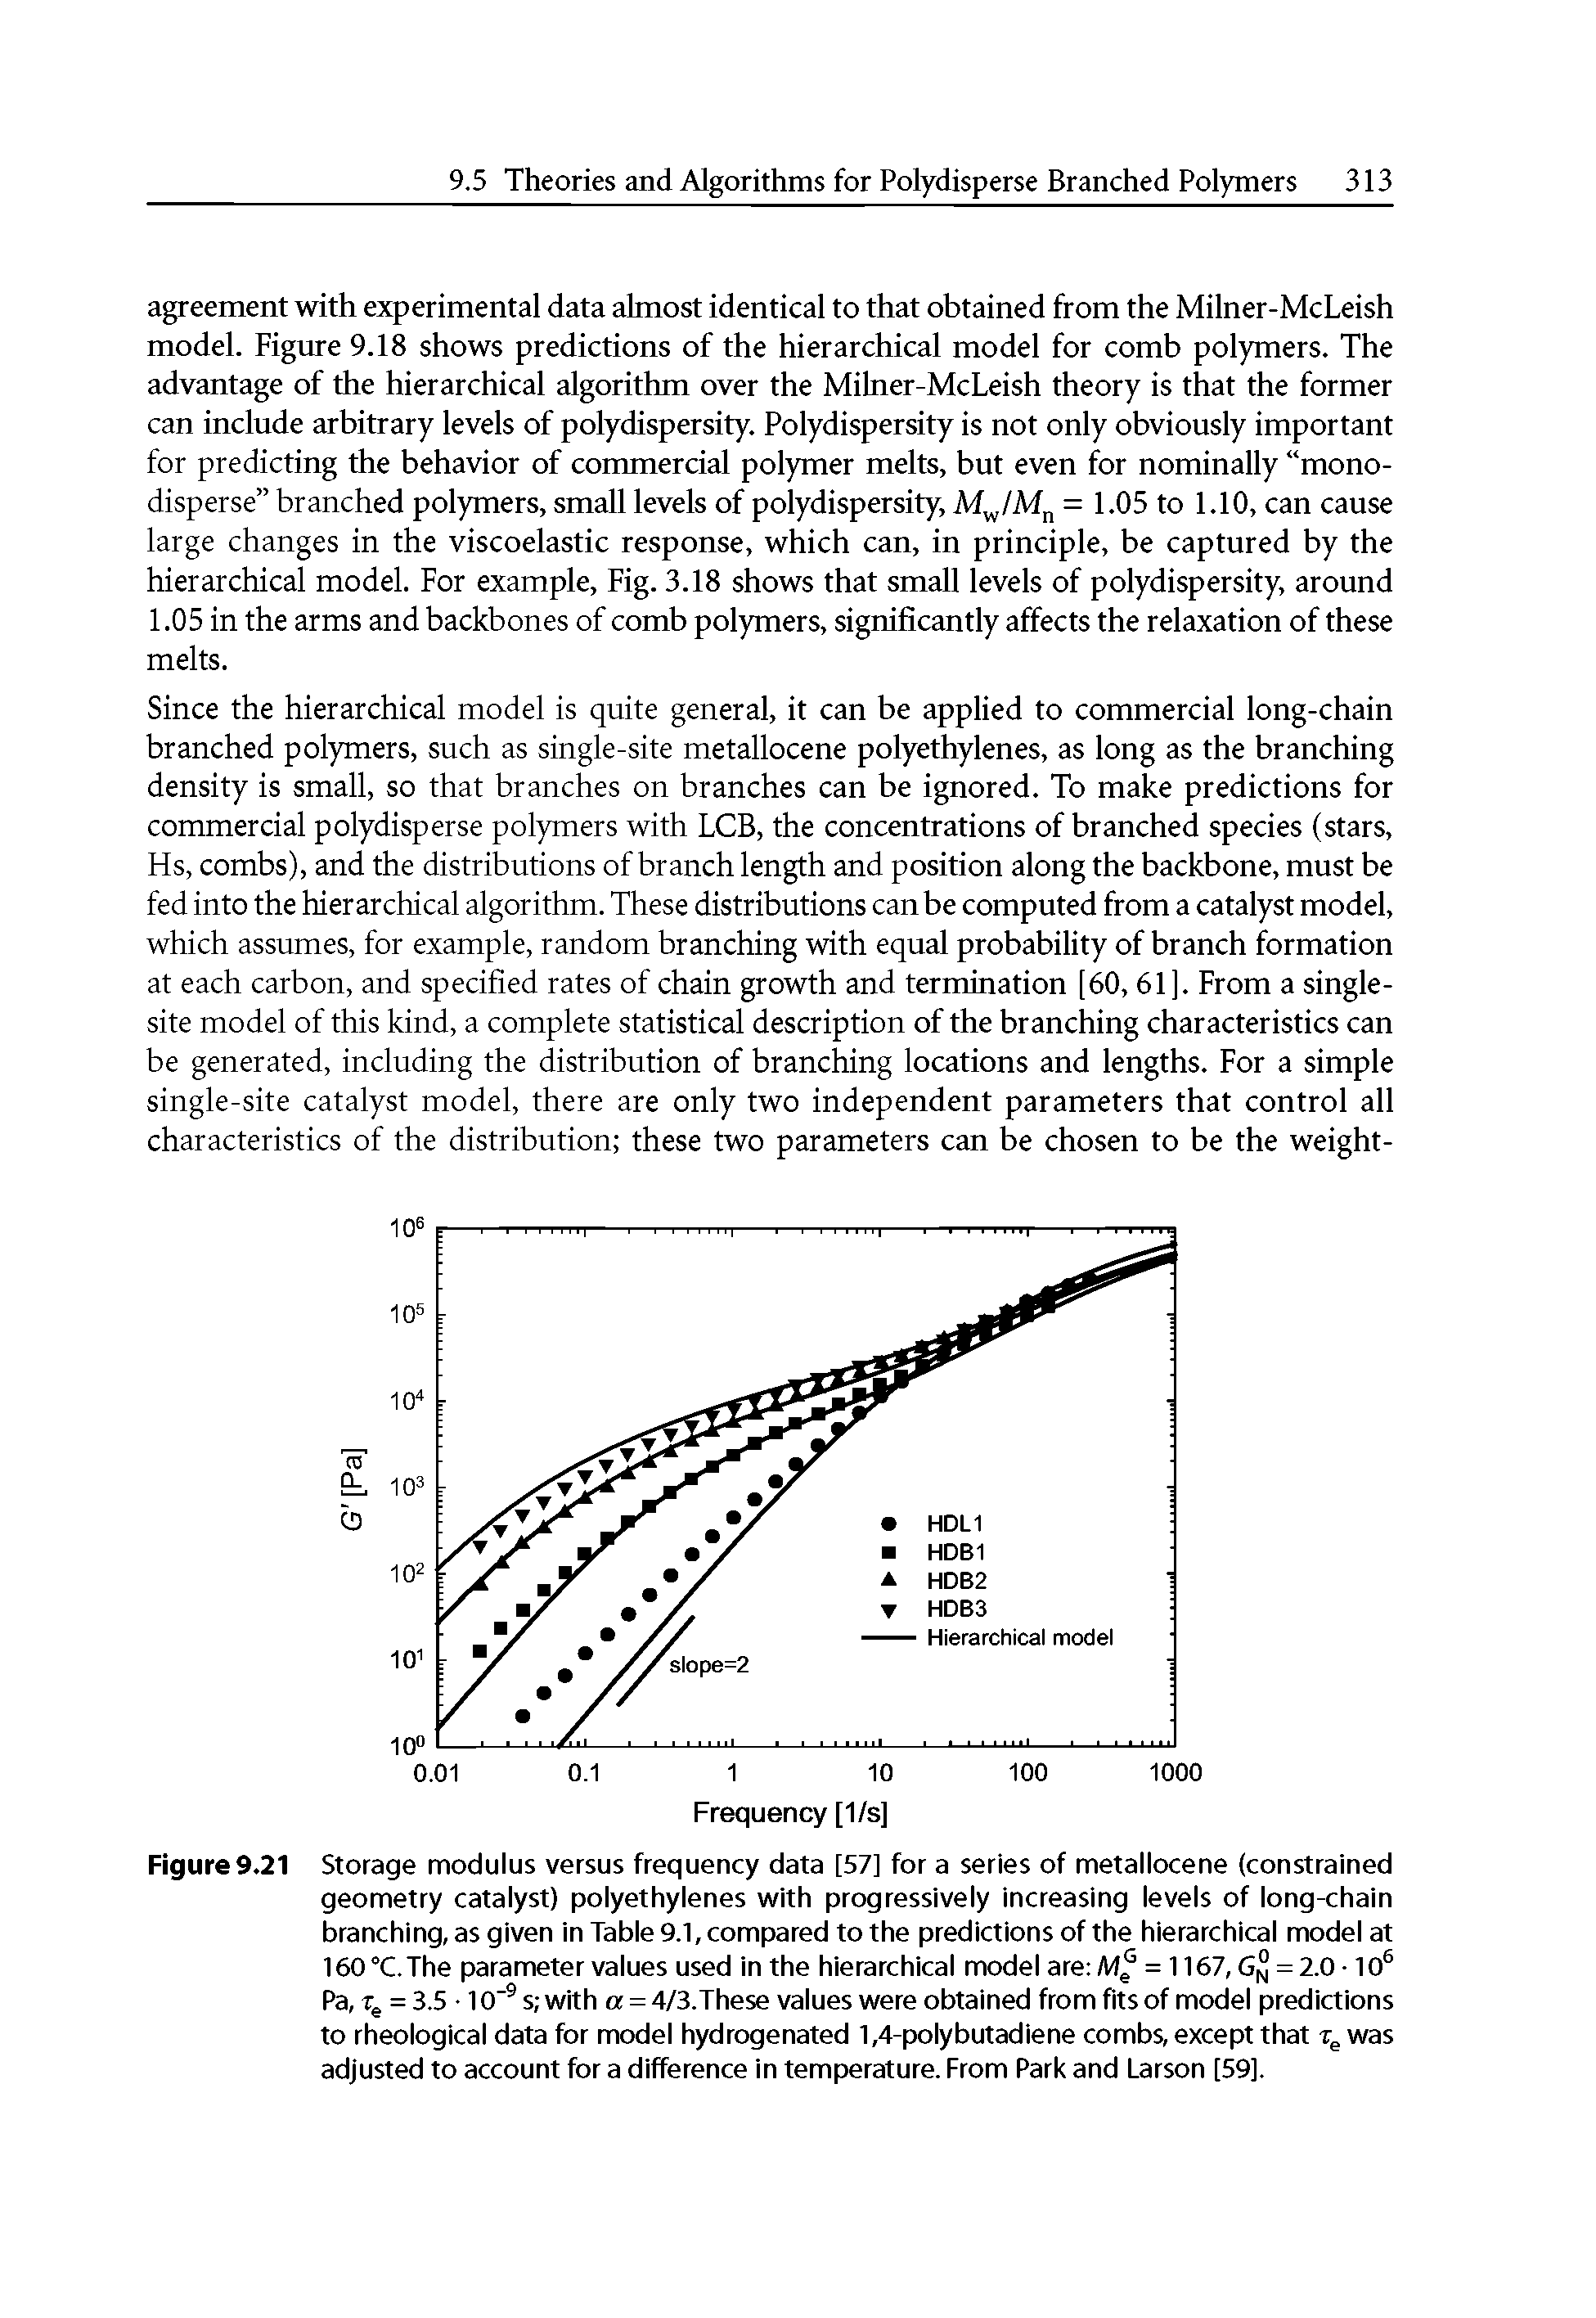 Figure9.21 Storage modulus versus frequency data [57] for a series of metallocene (constrained geometry catalyst) polyethylenes with progressively increasing levels of long-chain branching, as given in Table 9.1, compared to the predictions of the hierarchical model at 160 C.The parameter values used in the hierarchical model are M = 1167, G 5 = 2.0 10 Pa, Tg = 3.5 -10 s with a = 4/3.These values were obtained from fits of model predictions to rheological data for model hydrogenated 1,4-poly butadiene combs, except that was adjusted to account for a difference in temperature. From Park and Larson [59].